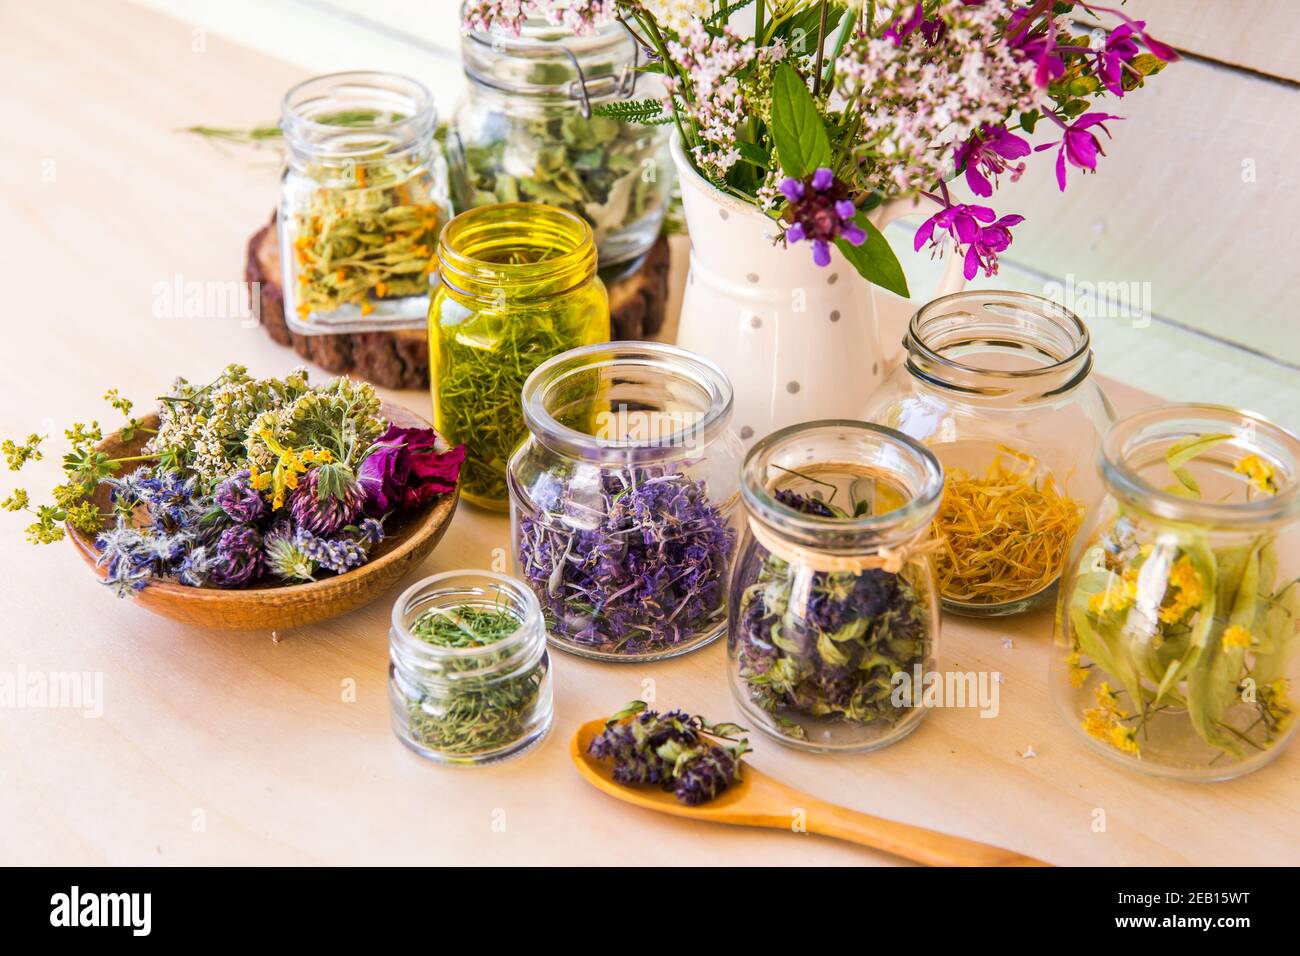 Home herbal apothecary concept. Lot of different dry herbal remedy plants( Chamaenerion angustifolium, Achillea millefolium, Tilia platyphyllos. Stock Photo